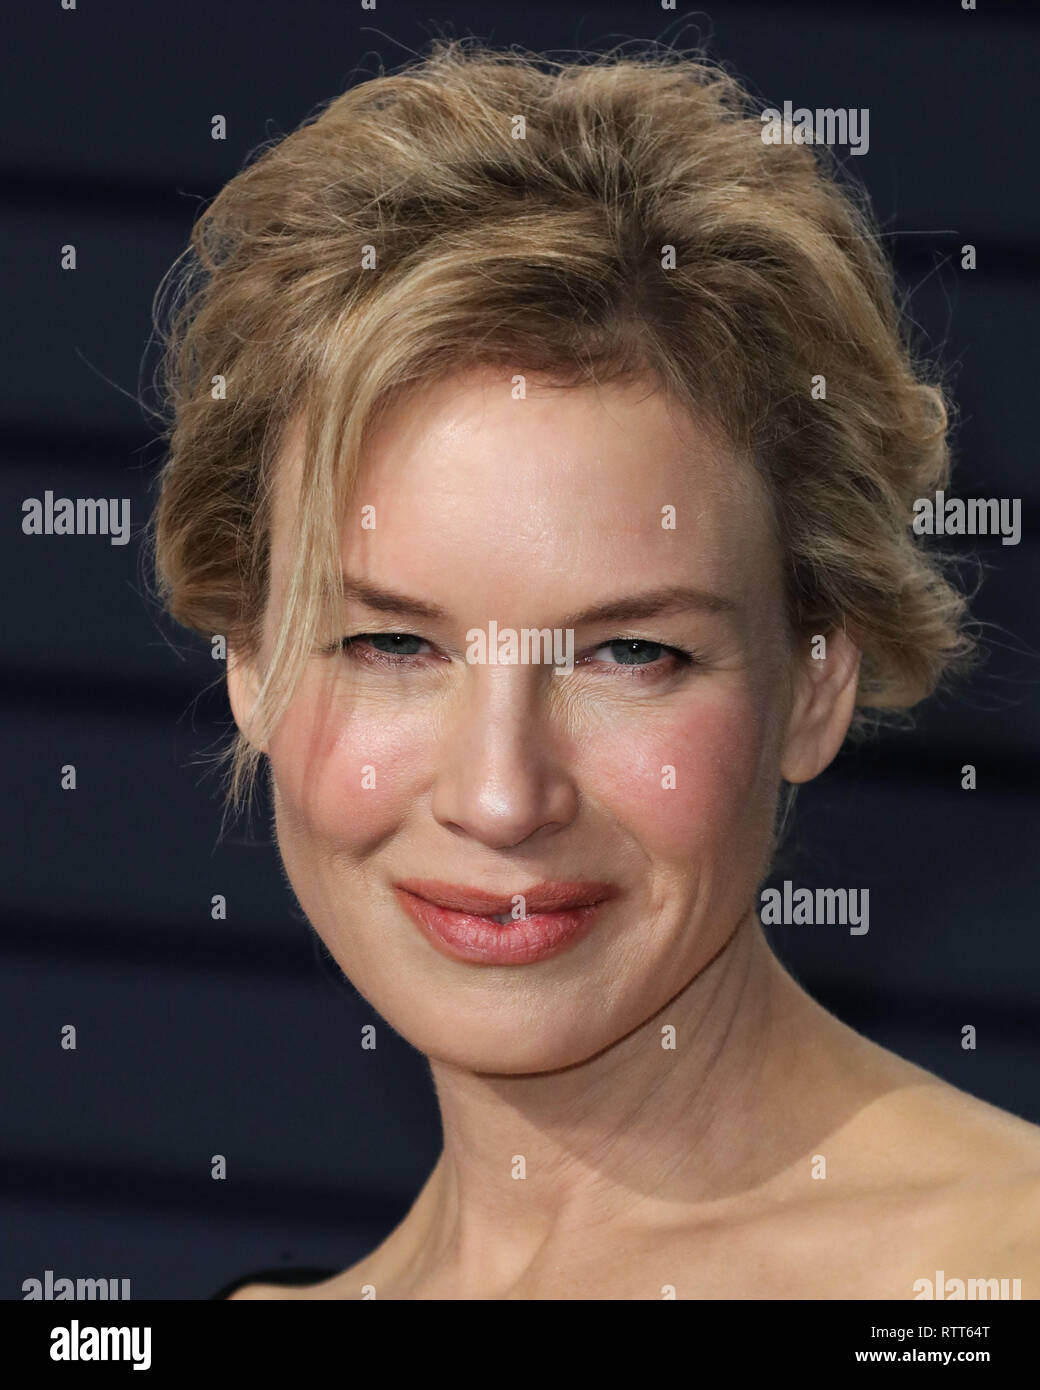 BEVERLY HILLS, LOS ANGELES, CA, USA - FEBRUARY 24: Actress Renee Zellweger wearing an A.W.A.K.E dress, Jimmy Choo shoes, David Webb jewelry, and a William and Son clutch arrives at the 2019 Vanity Fair Oscar Party held at the Wallis Annenberg Center for the Performing Arts on February 24, 2019 in Beverly Hills, Los Angeles, California, United States. (Photo by Xavier Collin/Image Press Agency) Stock Photo